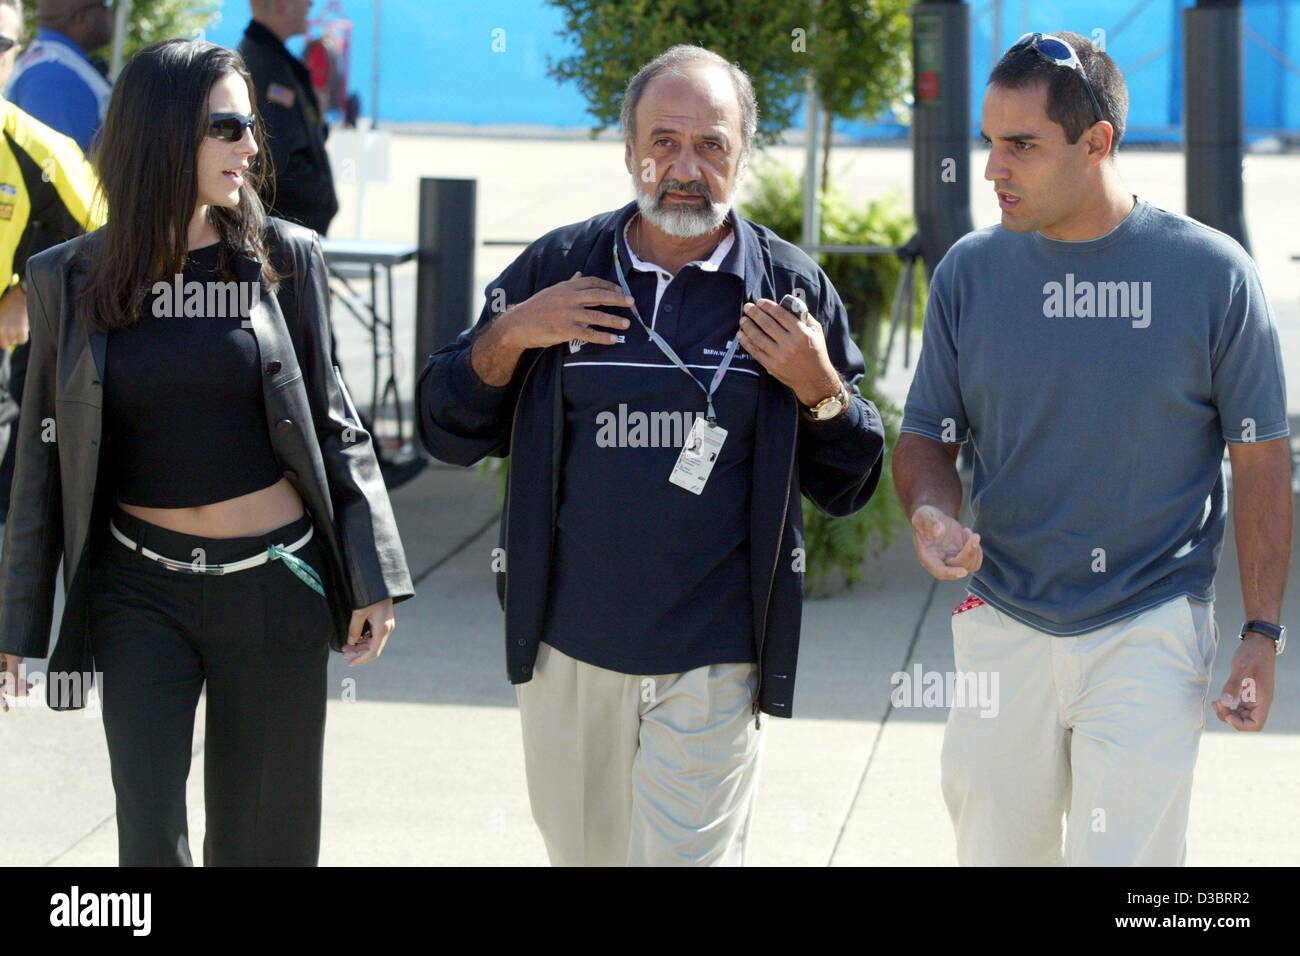 (dpa) - Colombian formula one pilot Juan Pablo Montoya (R) arrives with his wife Connie (L) and his father Pablo at the paddock at the race track in Indianapolis, USA, 25 September 2003. With an open day for the public thousands of fans were attracted to the race track two days ahead of the United S Stock Photo